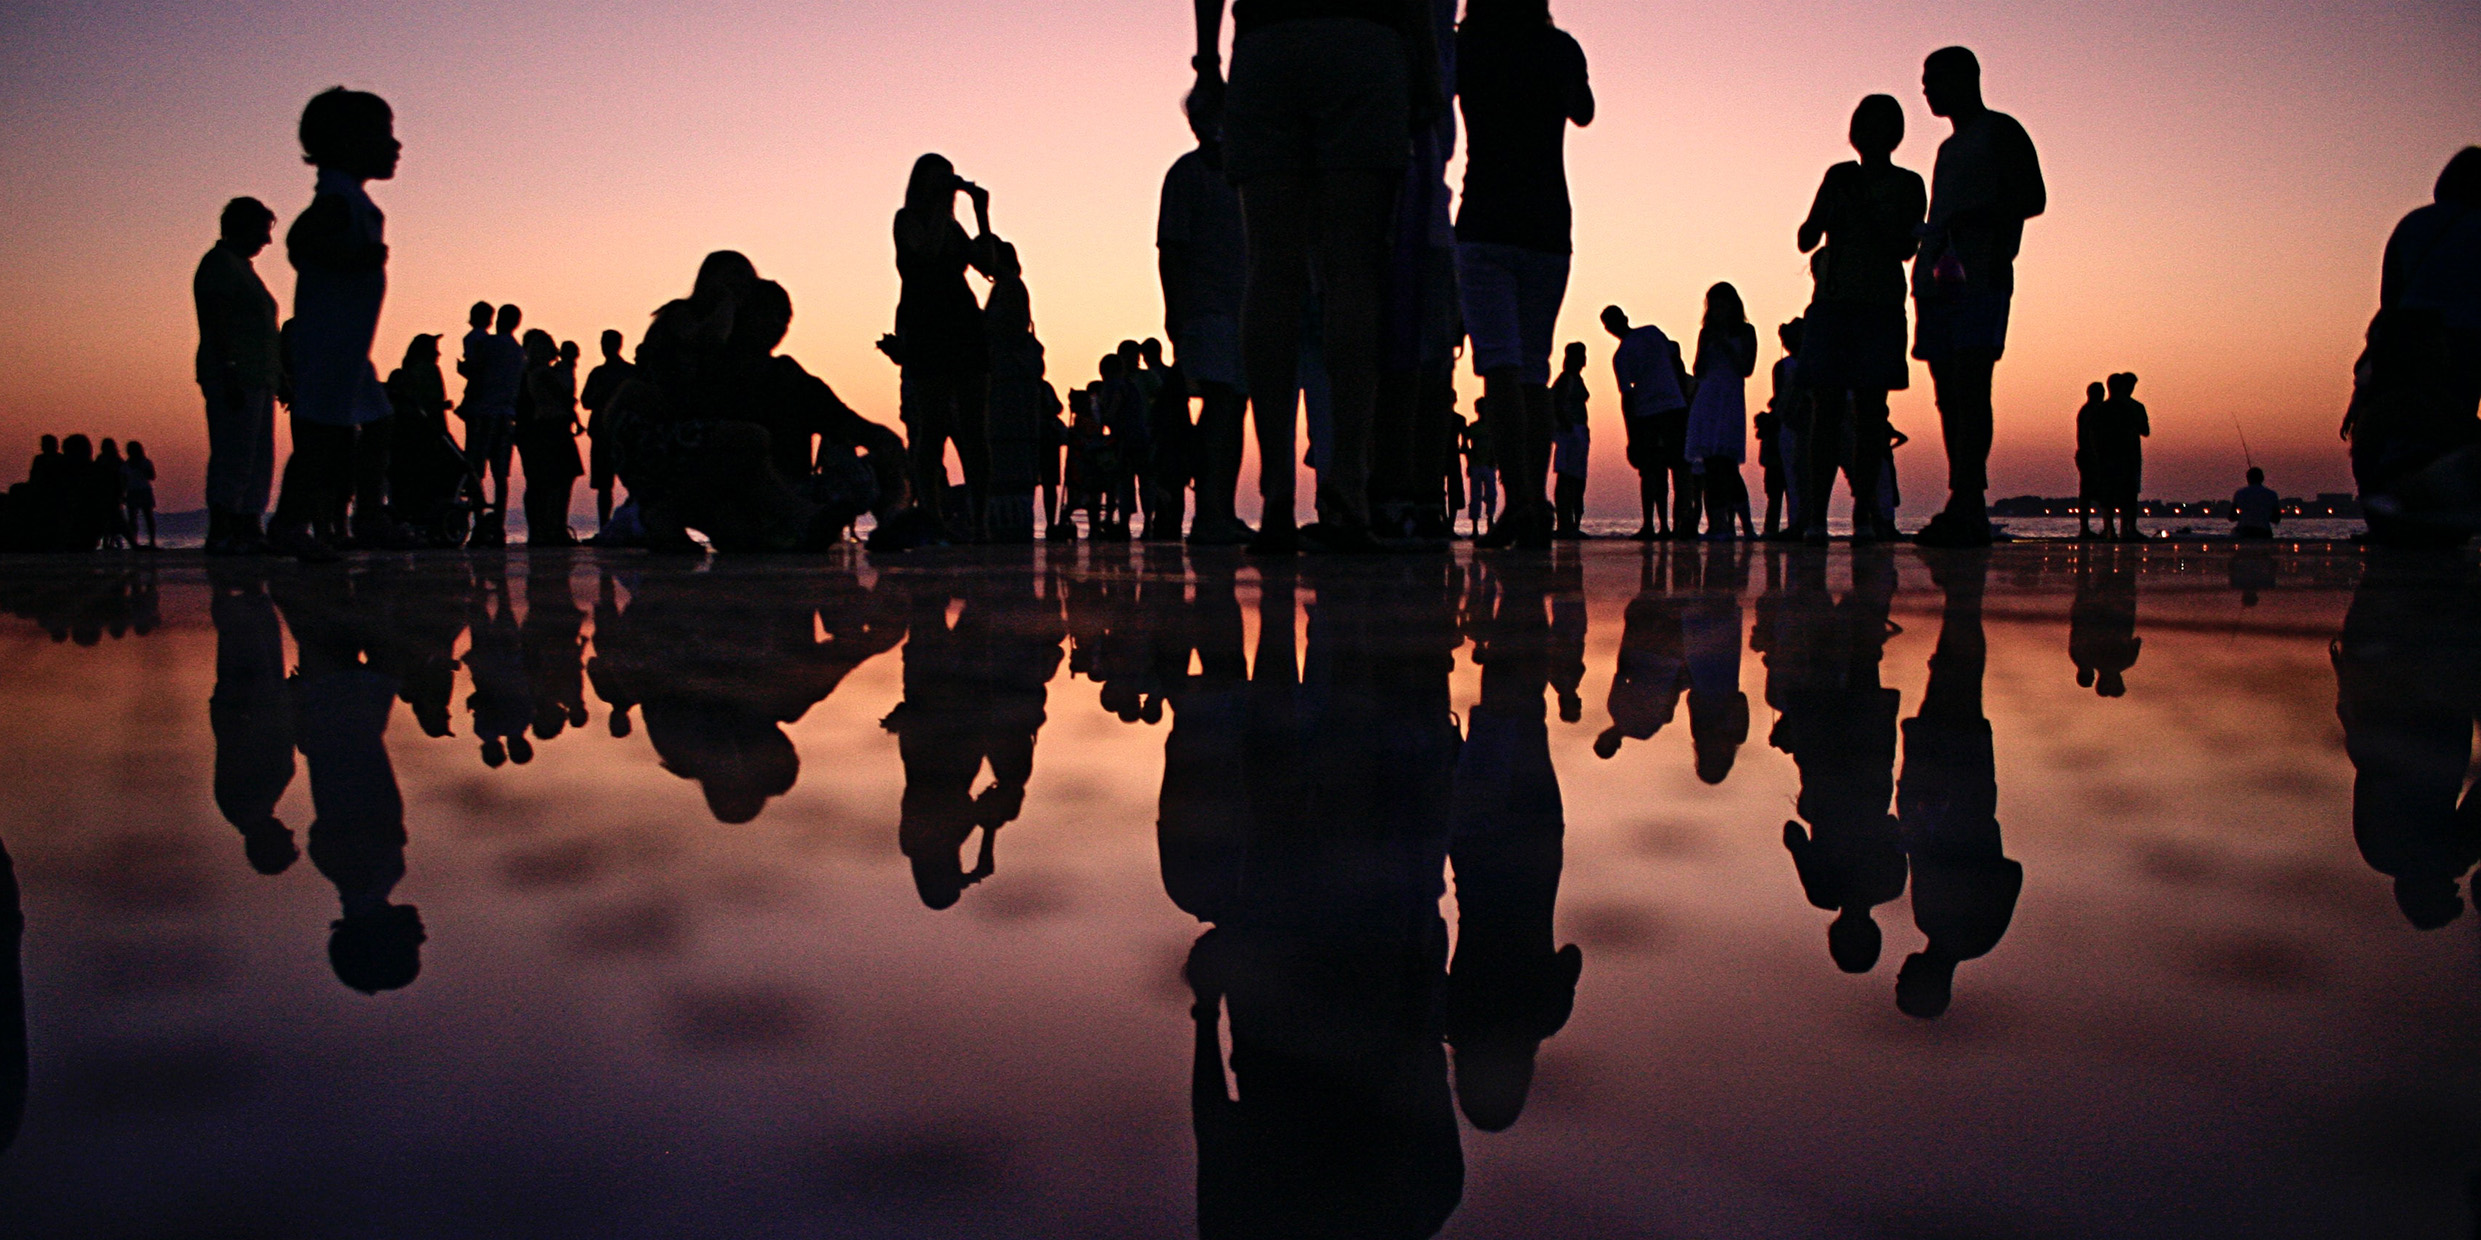 Image of a group of people silhouetted at dusk